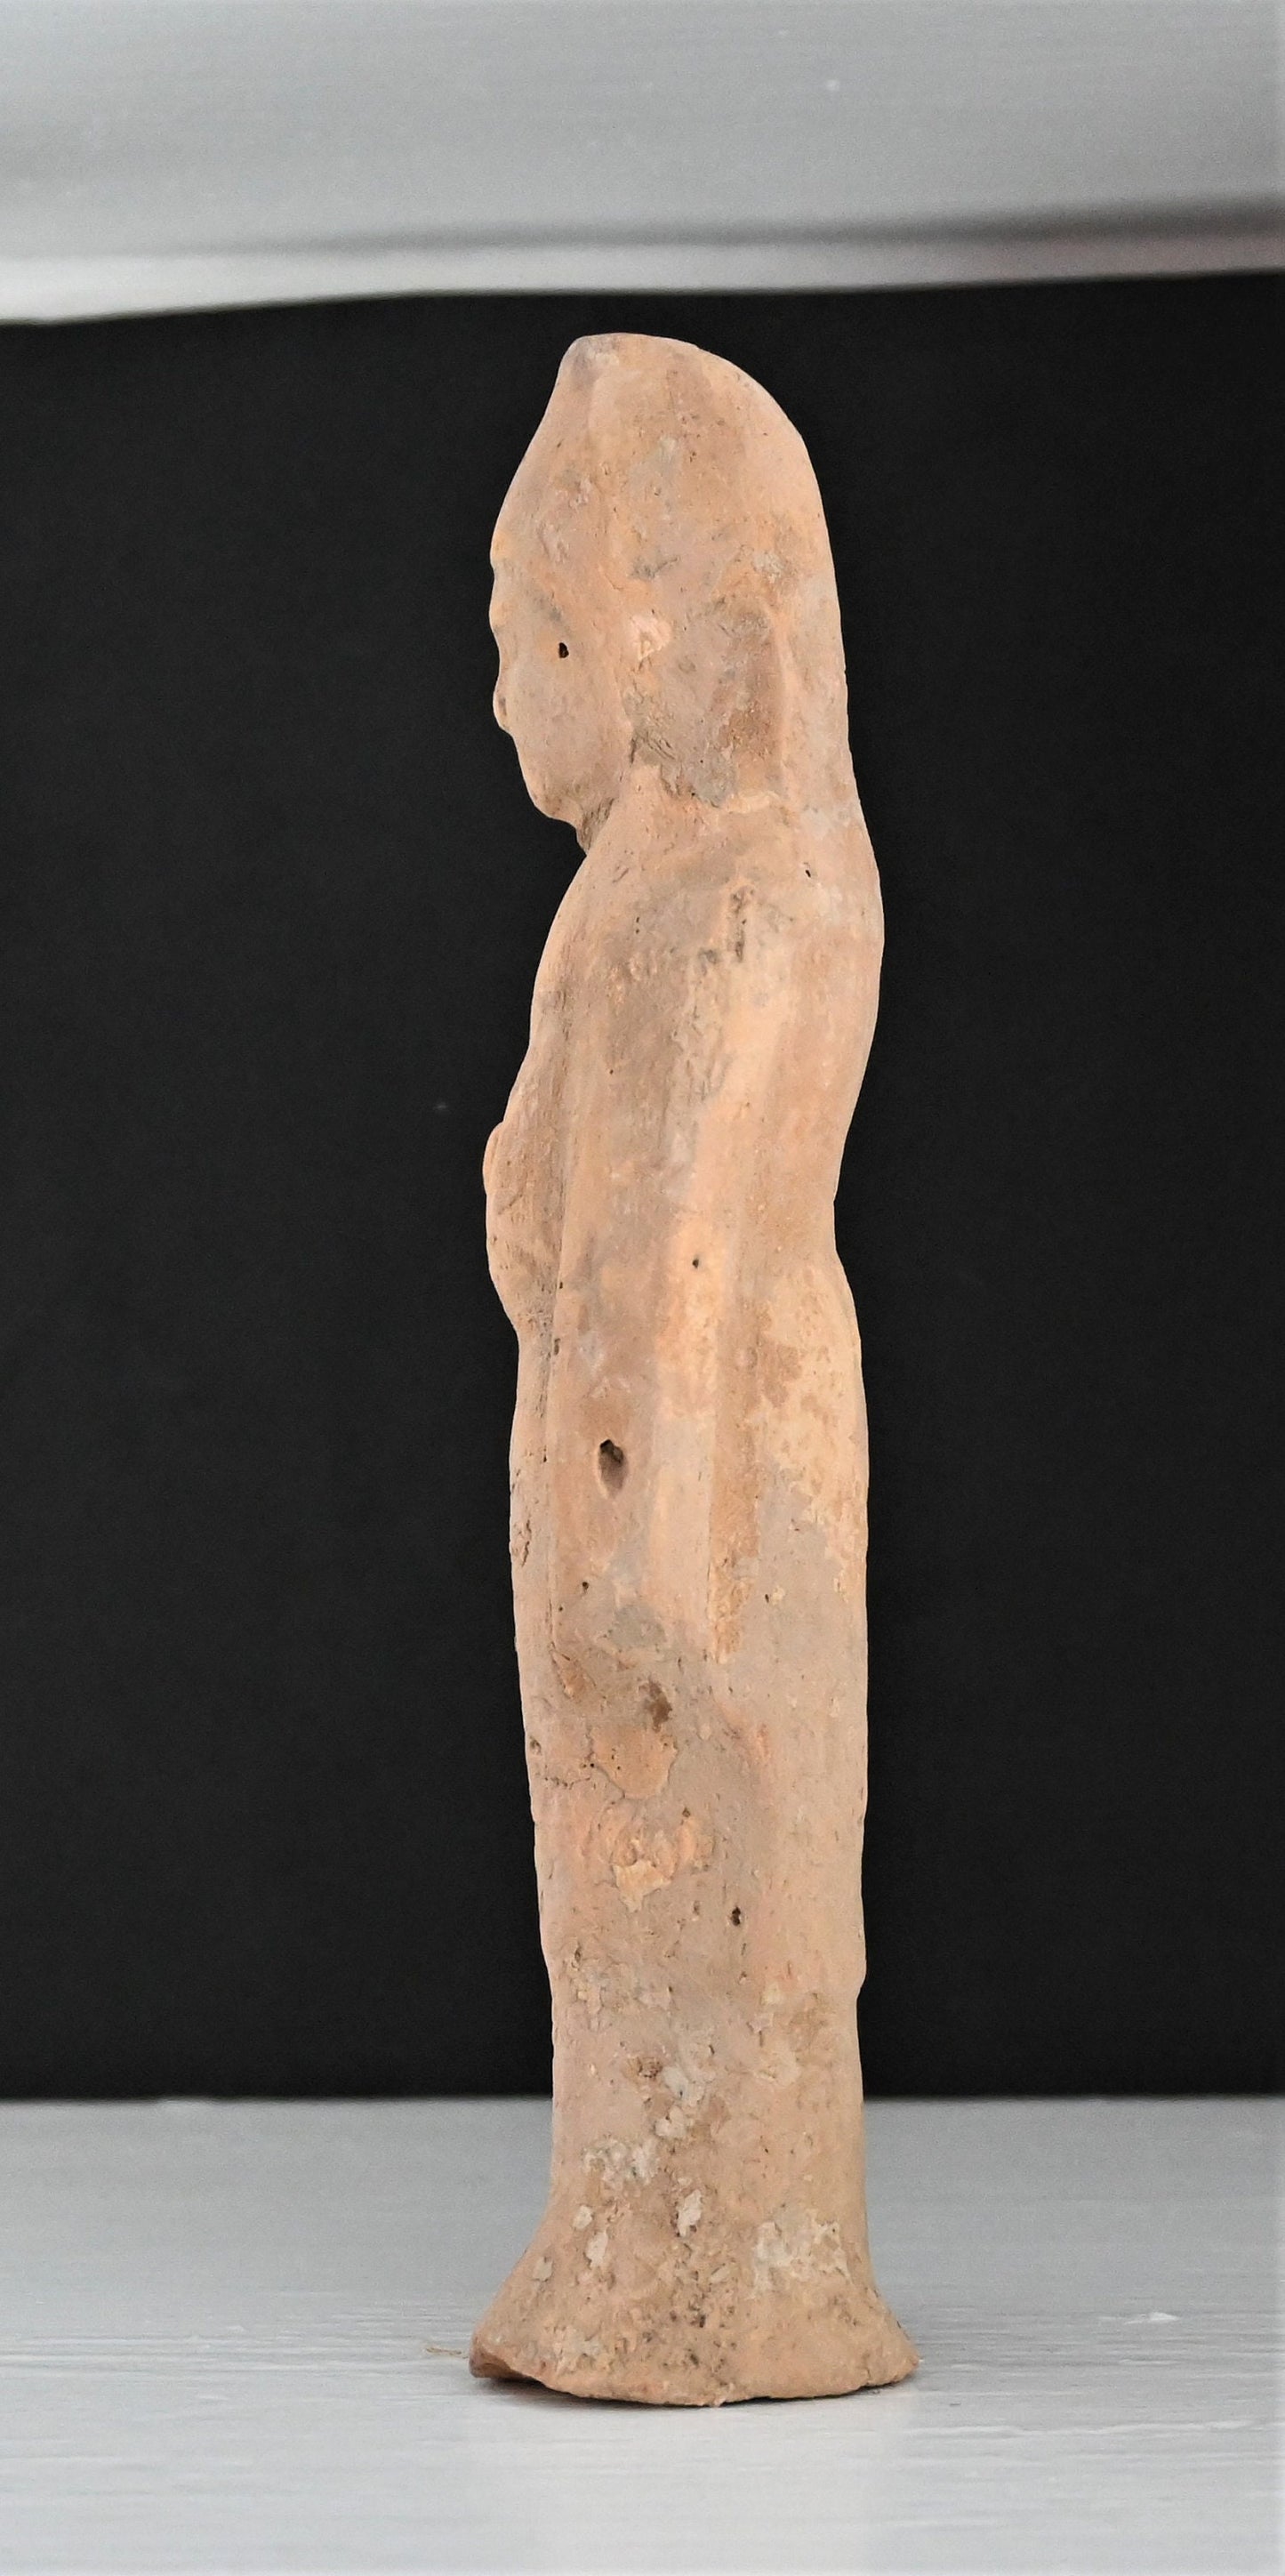 Authentic Han Dynasty, ca. 206 BCE to 220 CE mold-formed terracotta tomb attendant  7 5/8 inches with COA and provenance